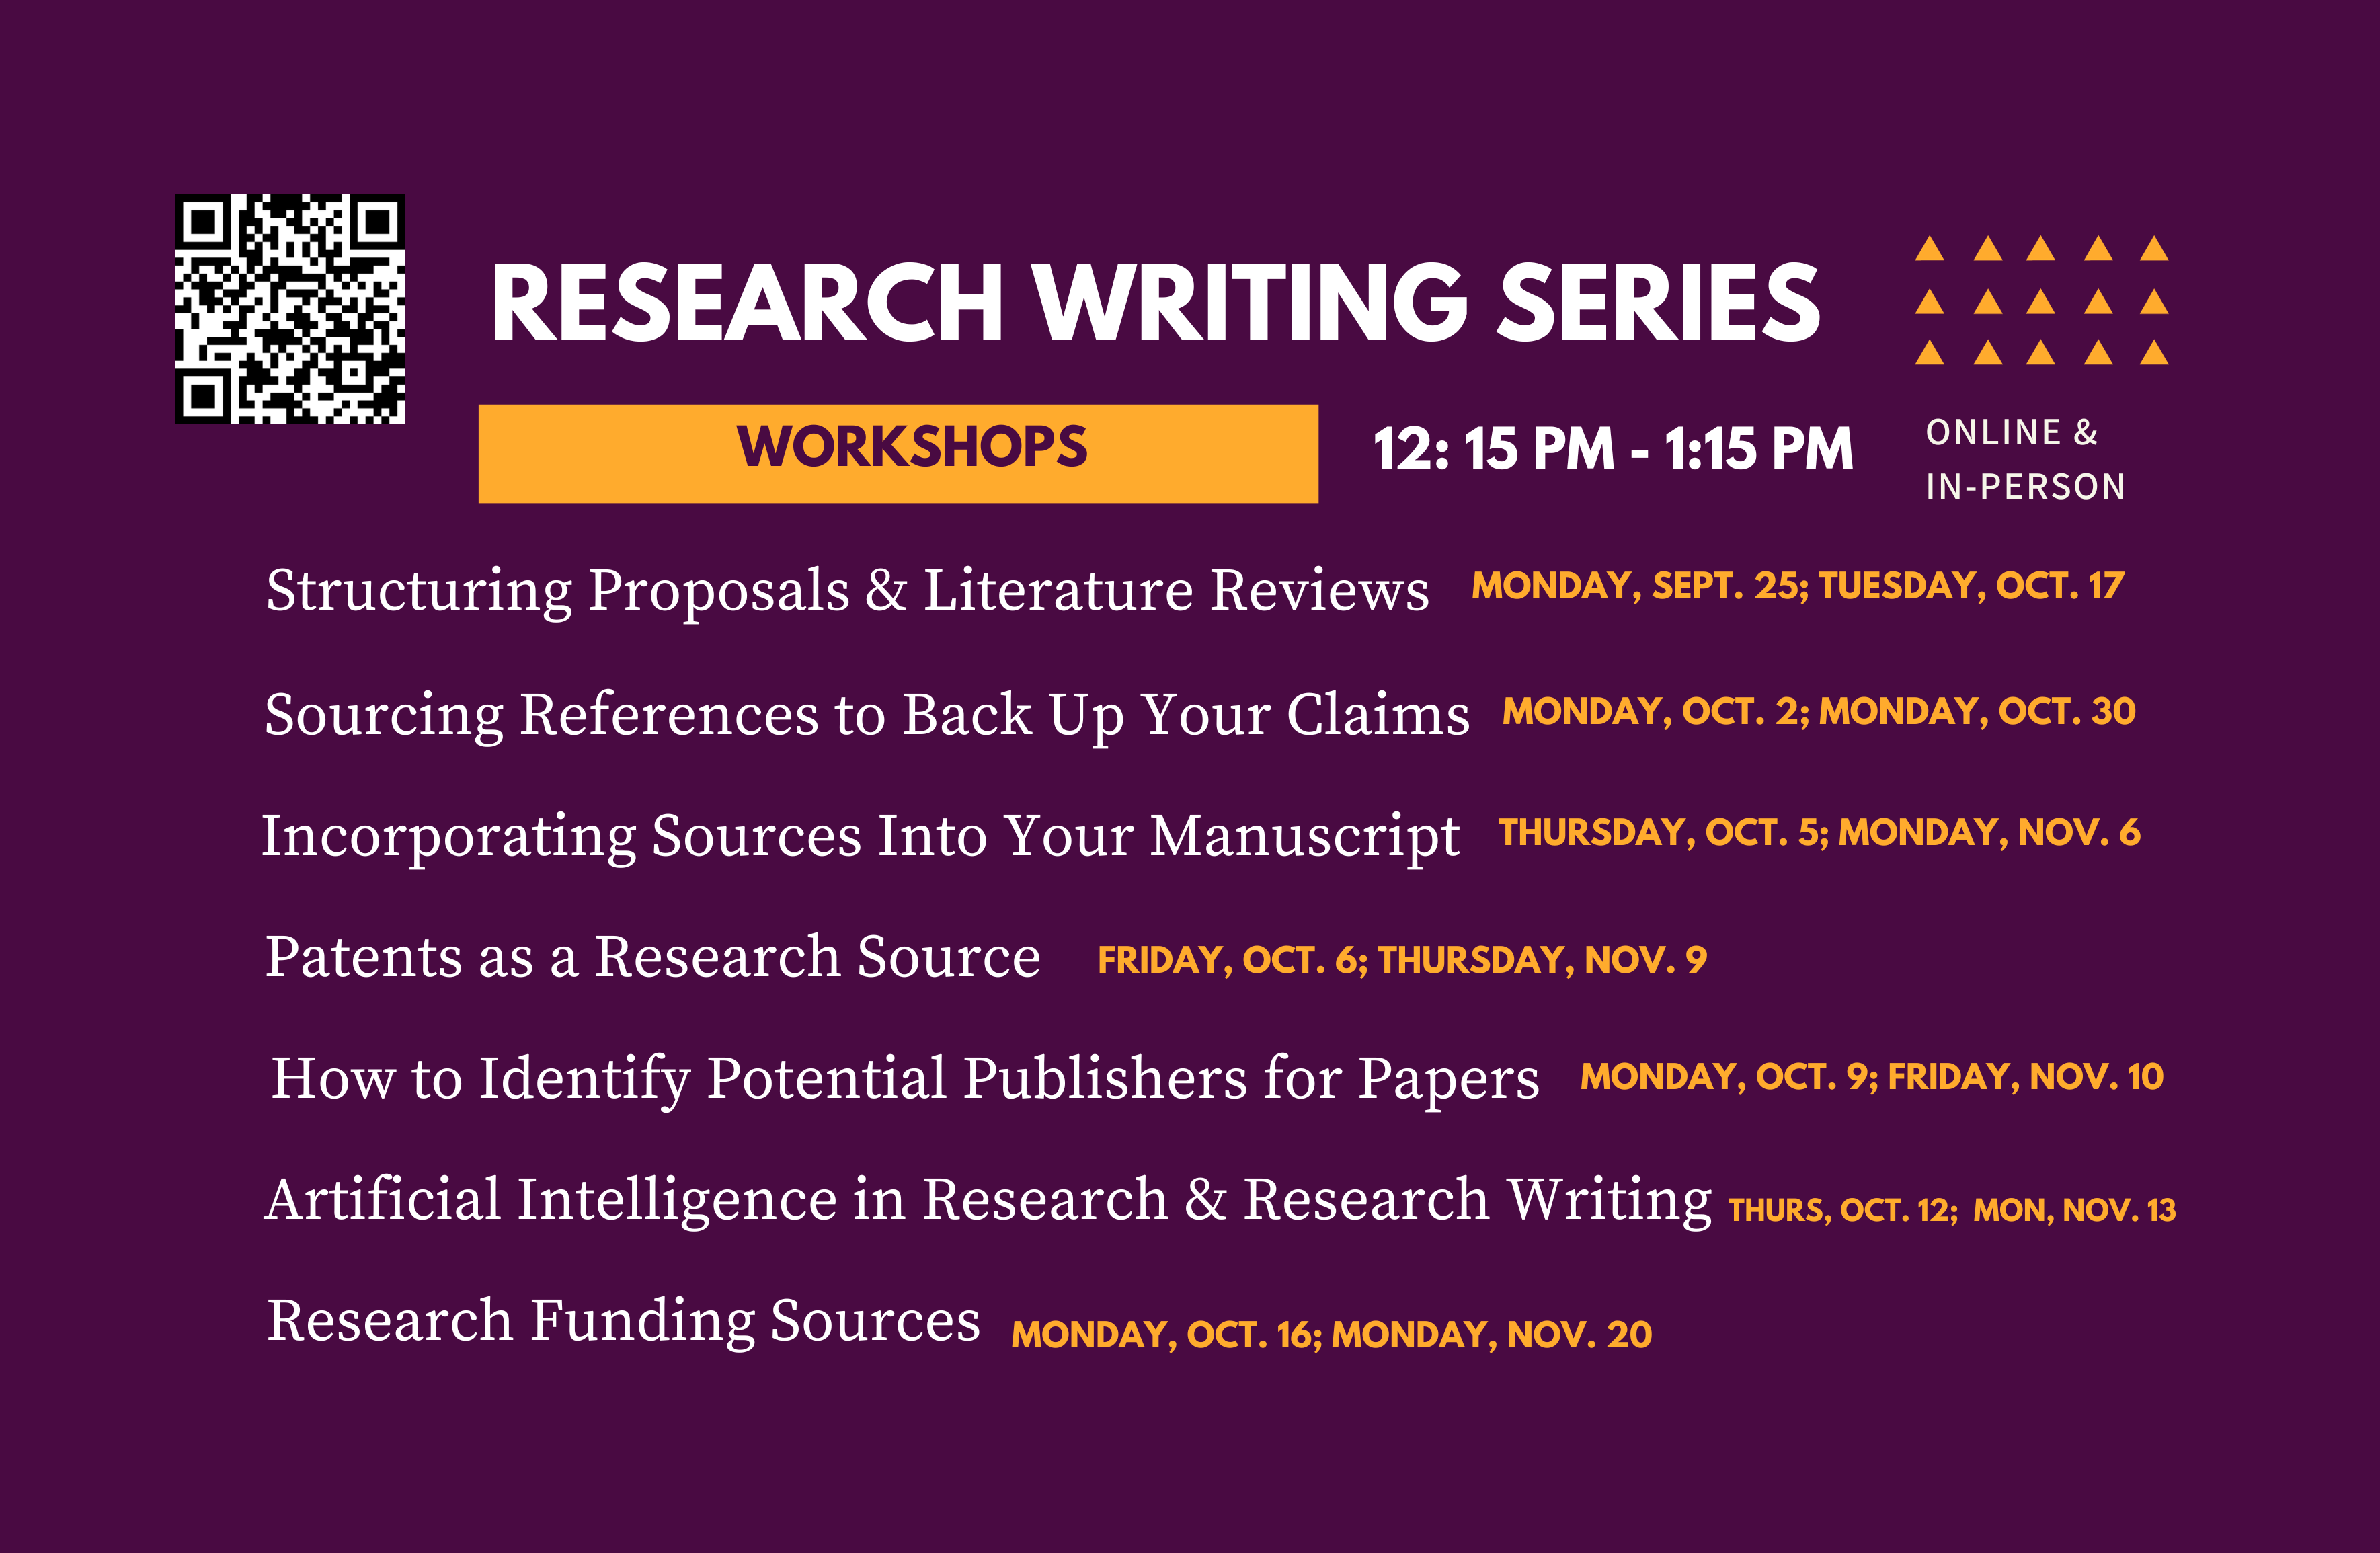 A series of workshop on research and research writing